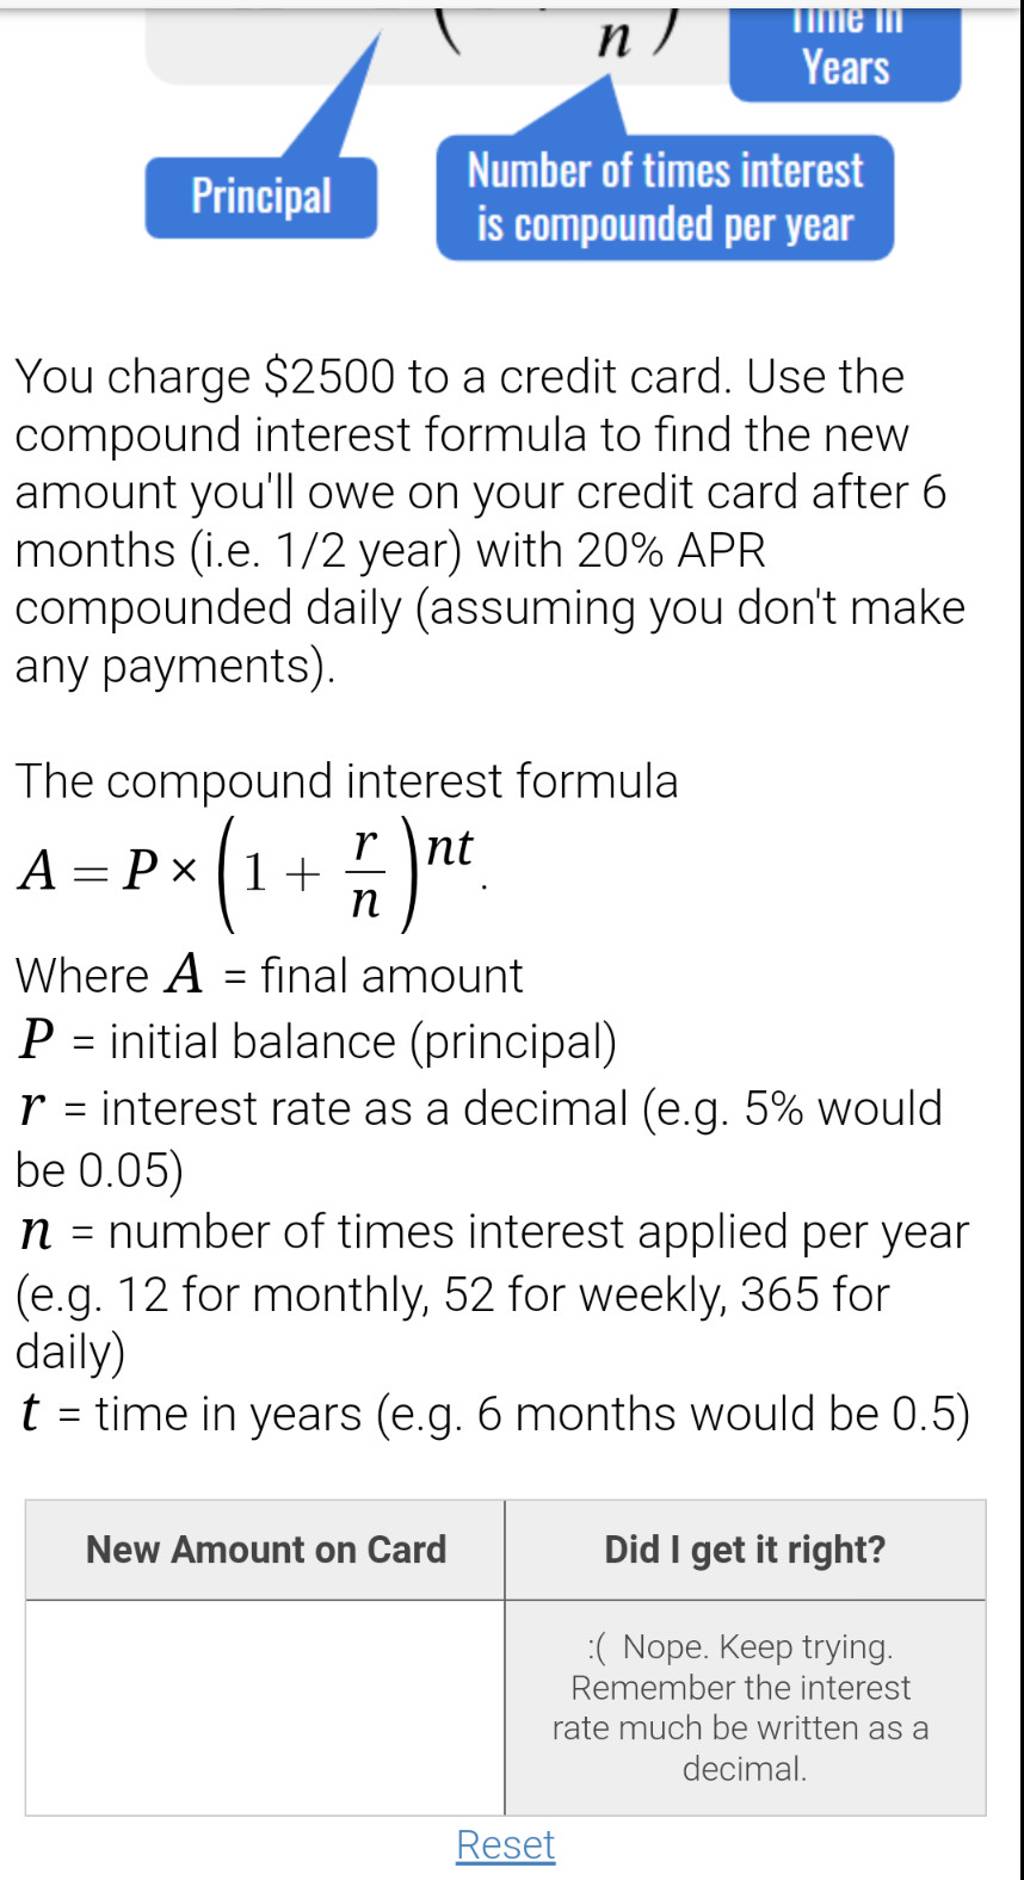 Principal
Number of times interest is compounded per year
You charge \